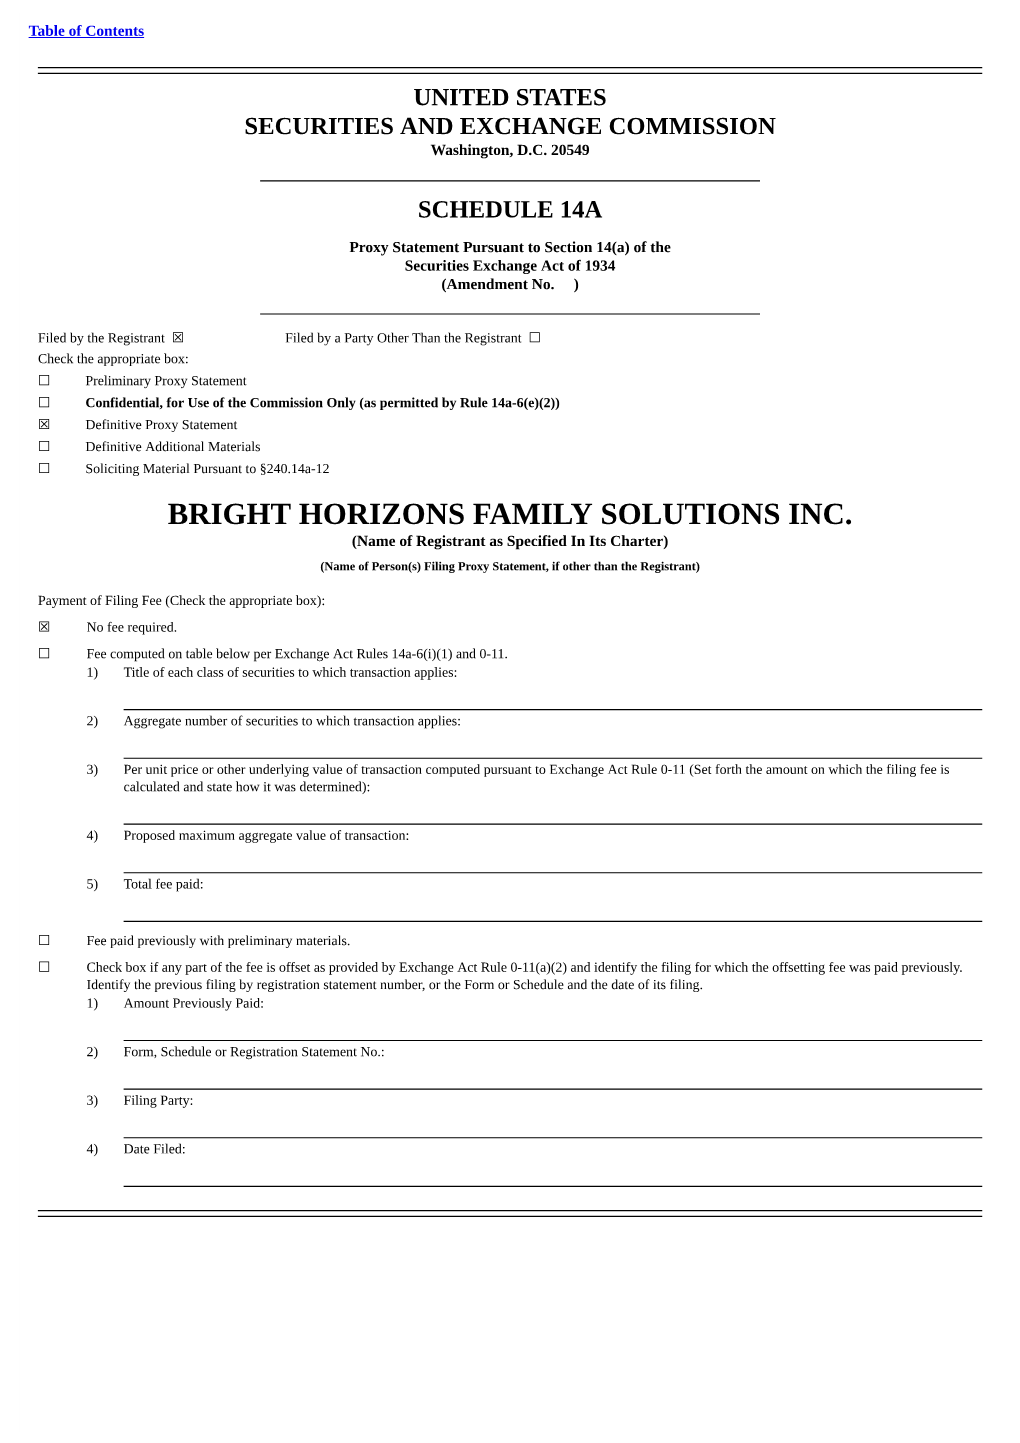 BRIGHT HORIZONS FAMILY SOLUTIONS INC. (Name of Registrant As Specified in Its Charter) (Name of Person(S) Filing Proxy Statement, If Other Than the Registrant)